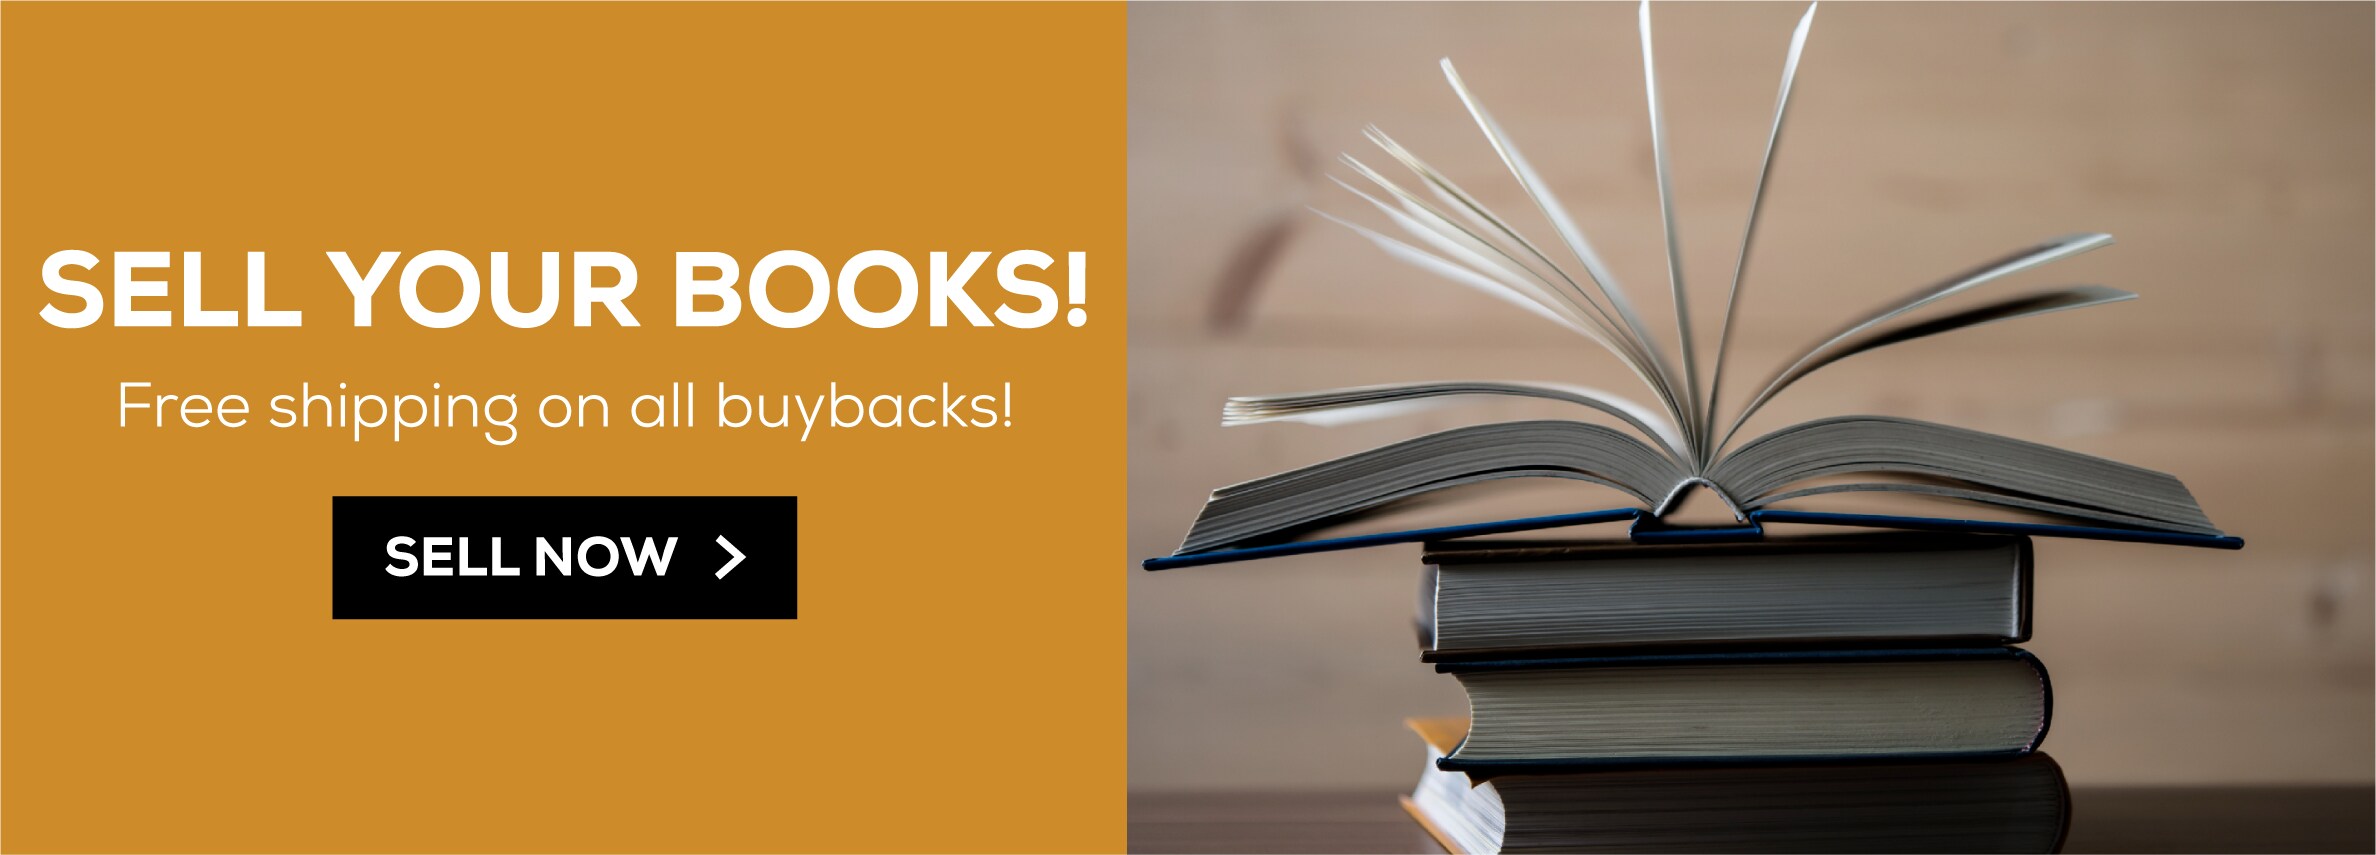 Sell your textbooks online. Sell now.